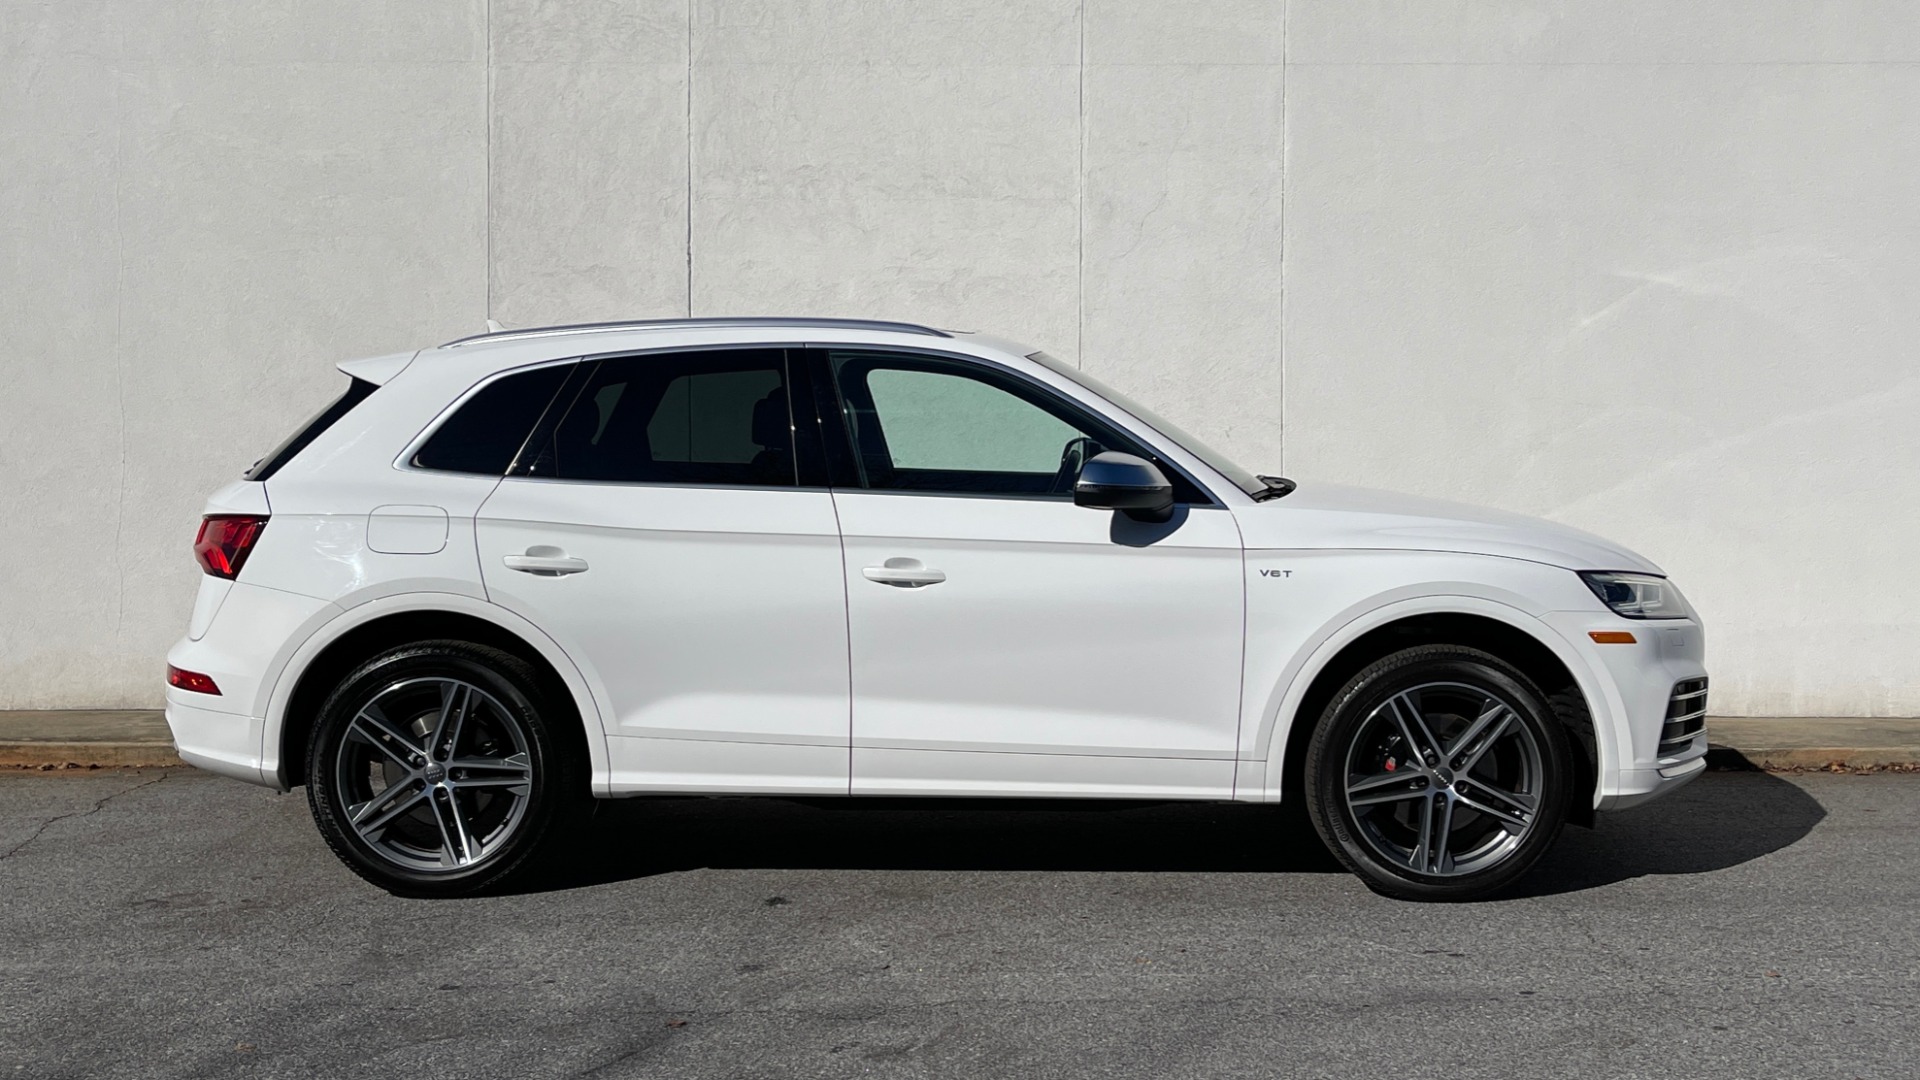 Used 2018 Audi SQ5 PREMIUM PLUS / NAV / SUNROOF / 12.3IN SCREEN / REARVIEW for sale Sold at Formula Imports in Charlotte NC 28227 7